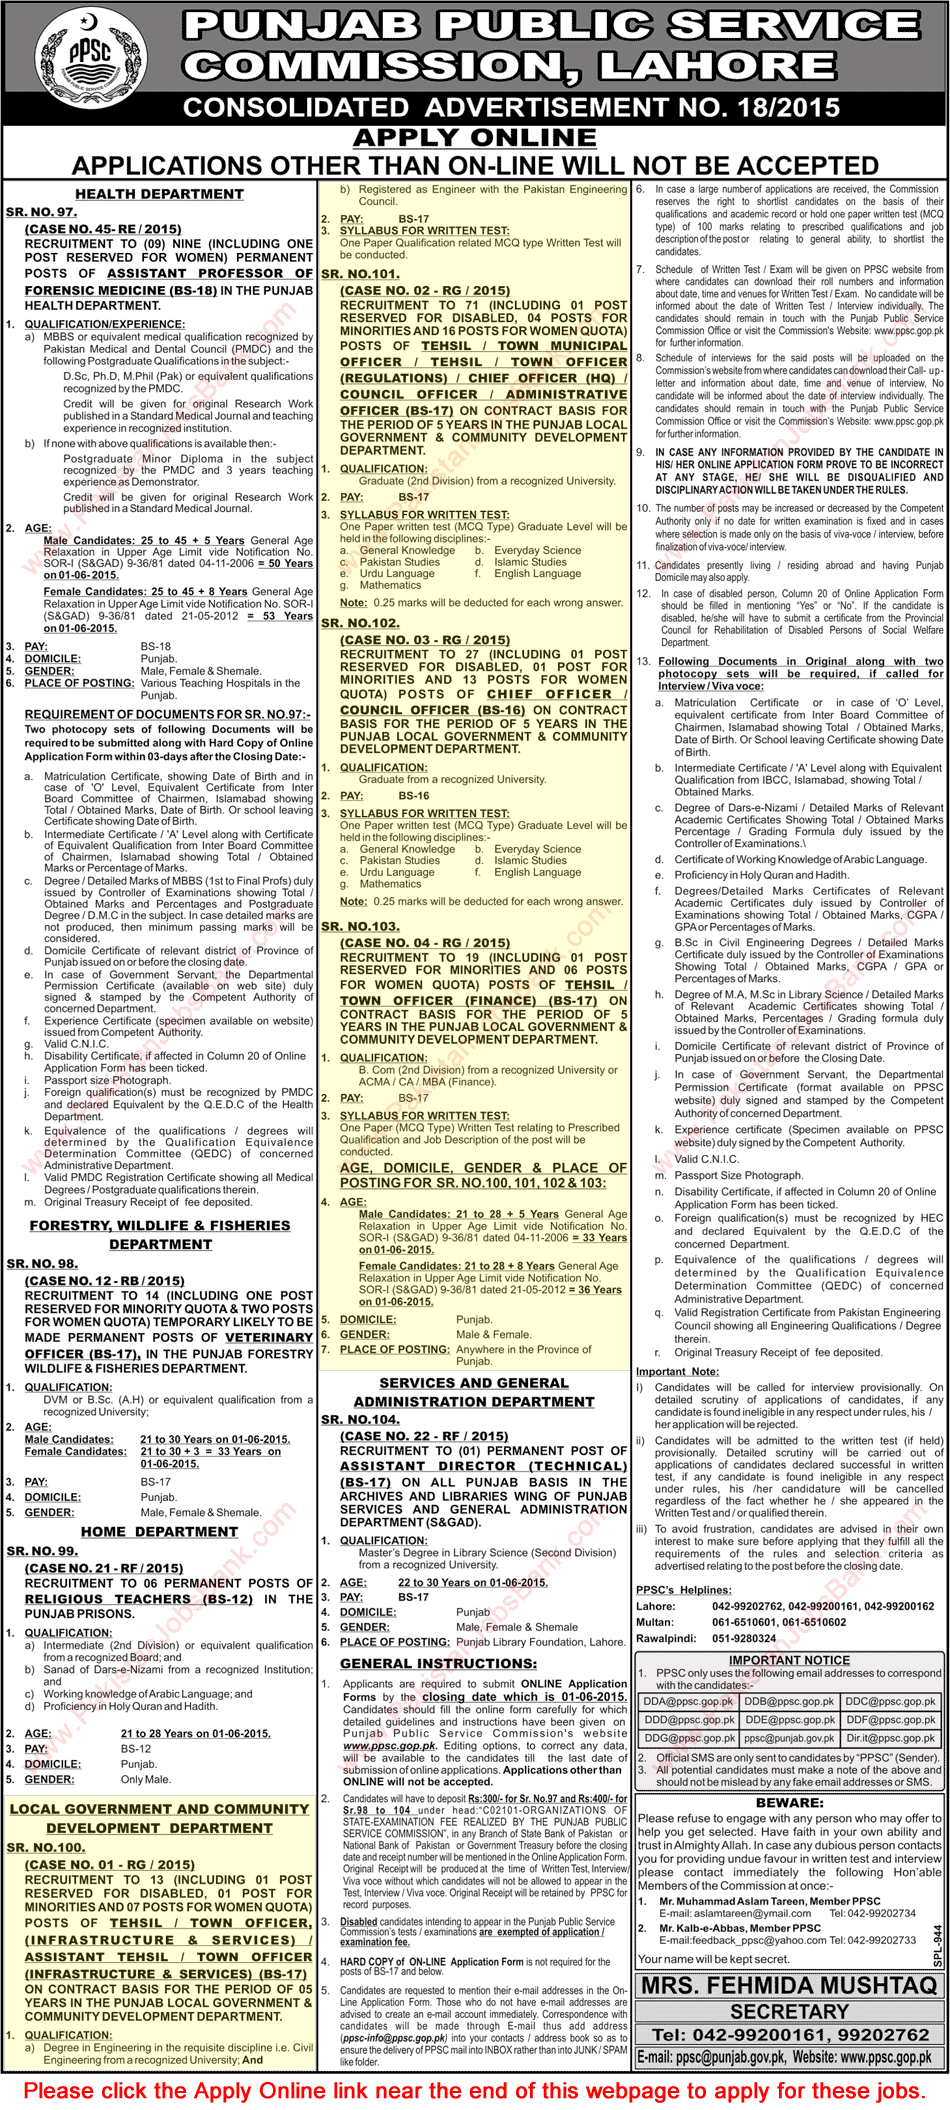 PPSC Local Government and Community Development Department Punjab Jobs 2015 May Latest Advertisement